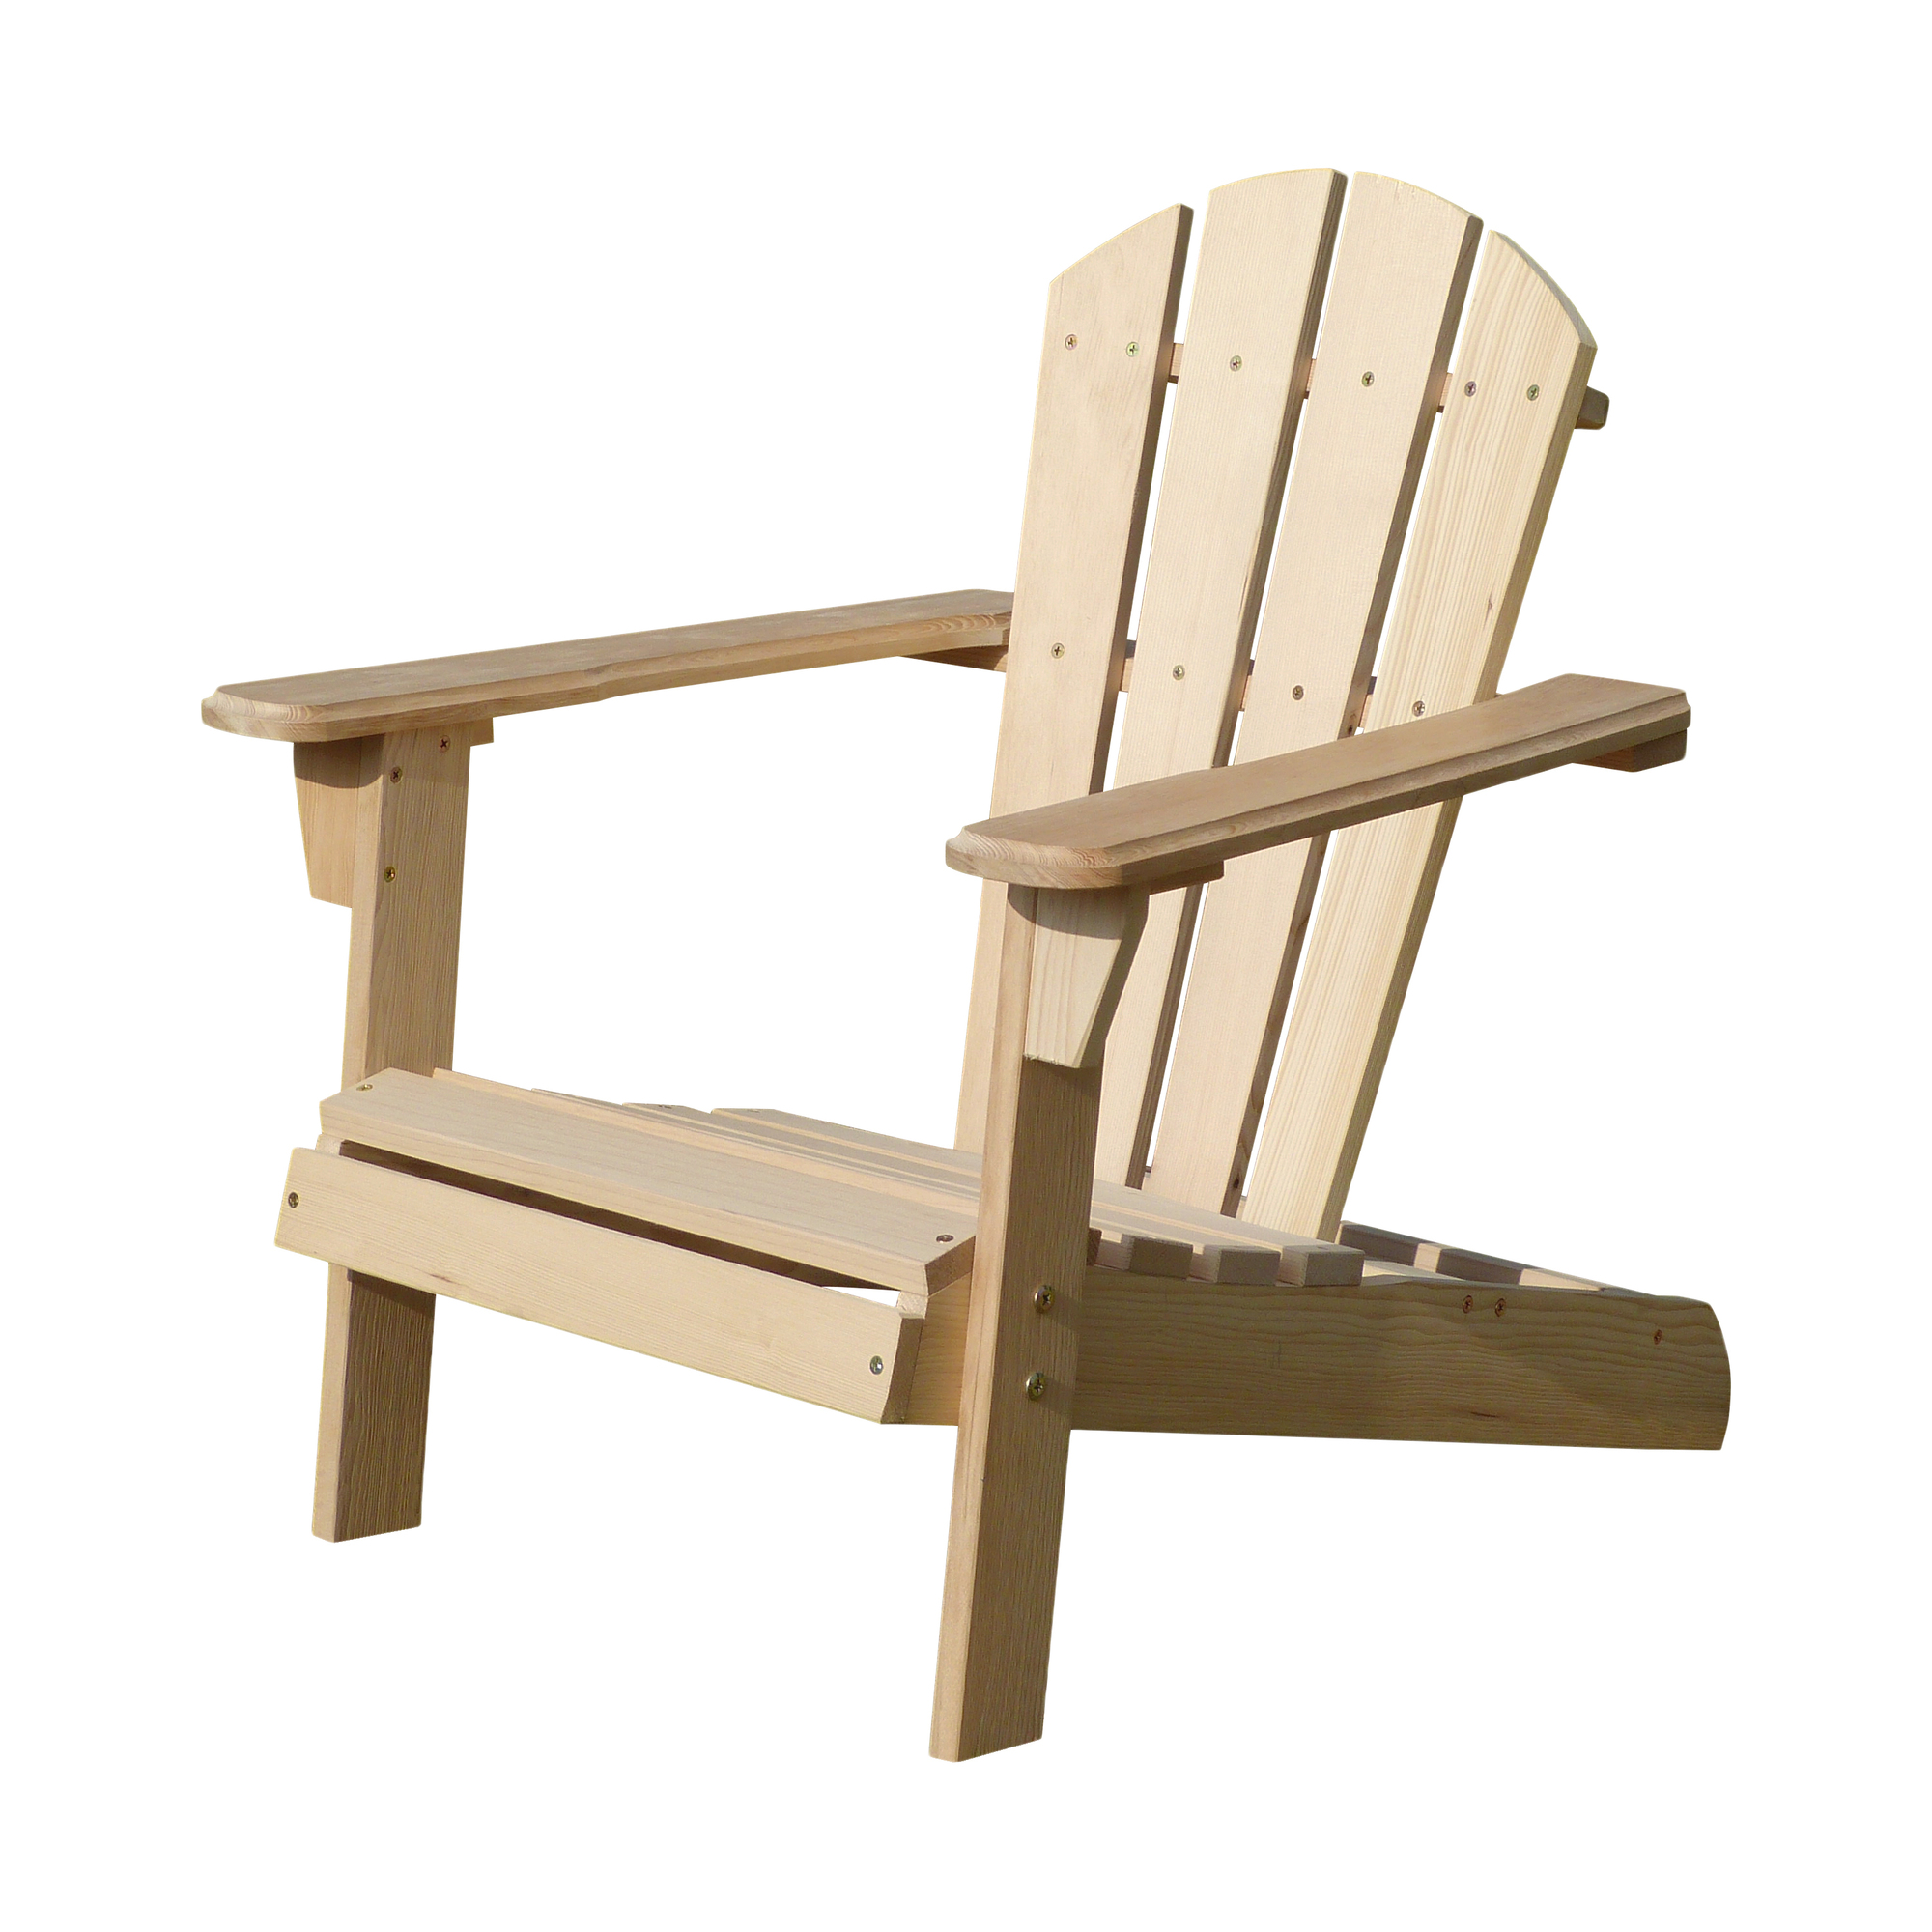 Merry Products, Kids Adirondack Chair Kit, Primary Color Natural, Included (qty.) 1, Model ADC0292200000